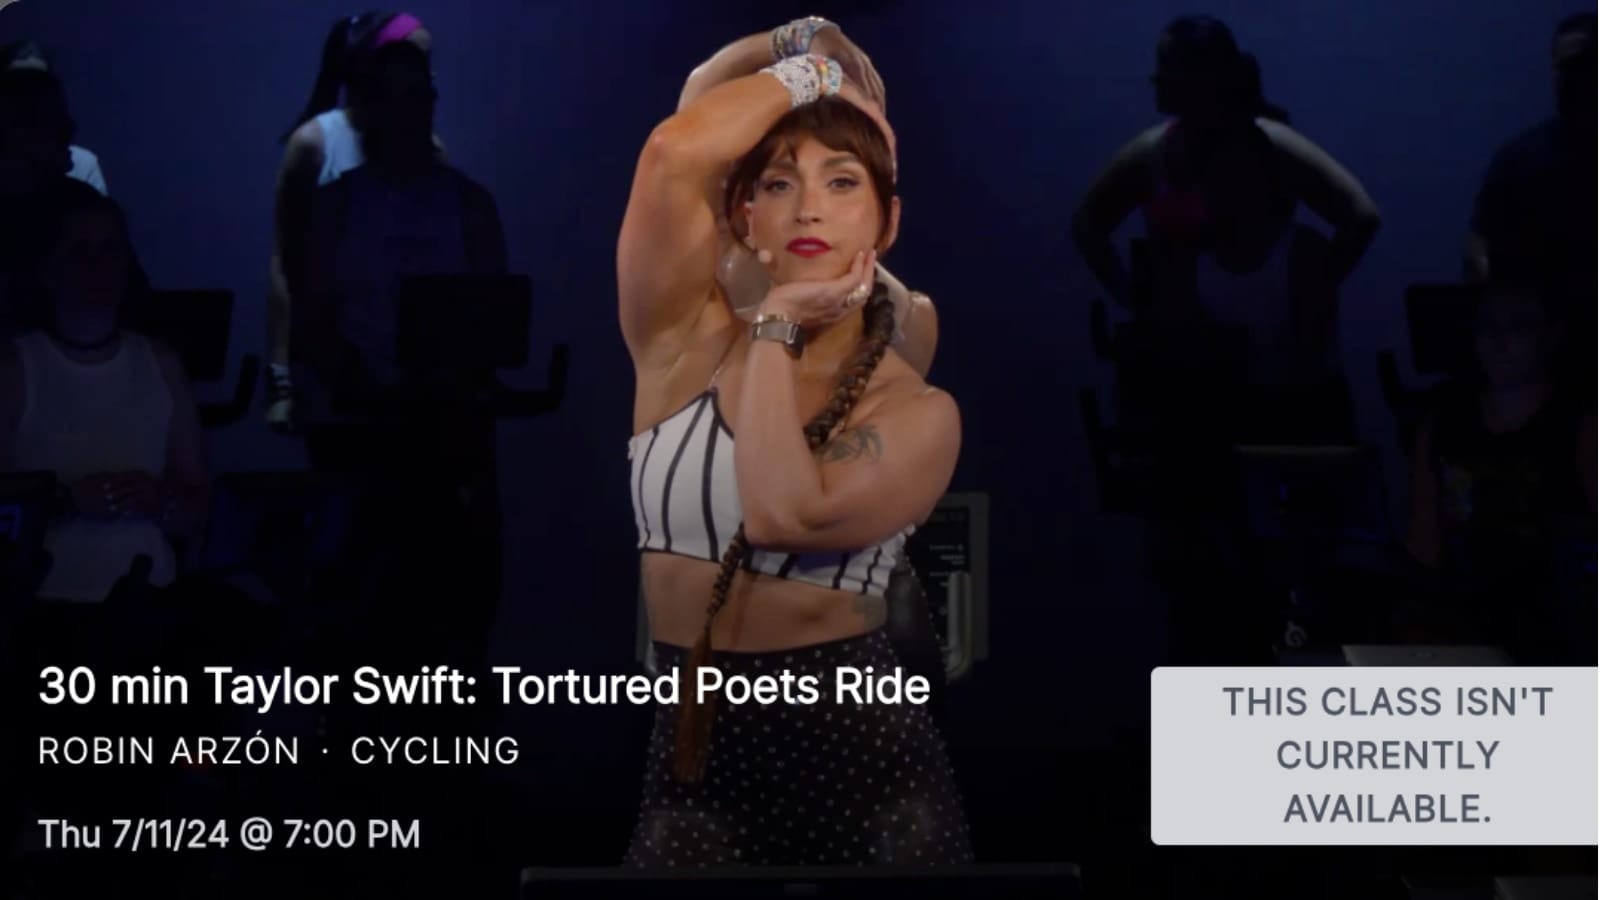 Rumor: The Peloton Taylor Swift Tortured Poets Department Artist Series will be released on July 11 or 18, 2024